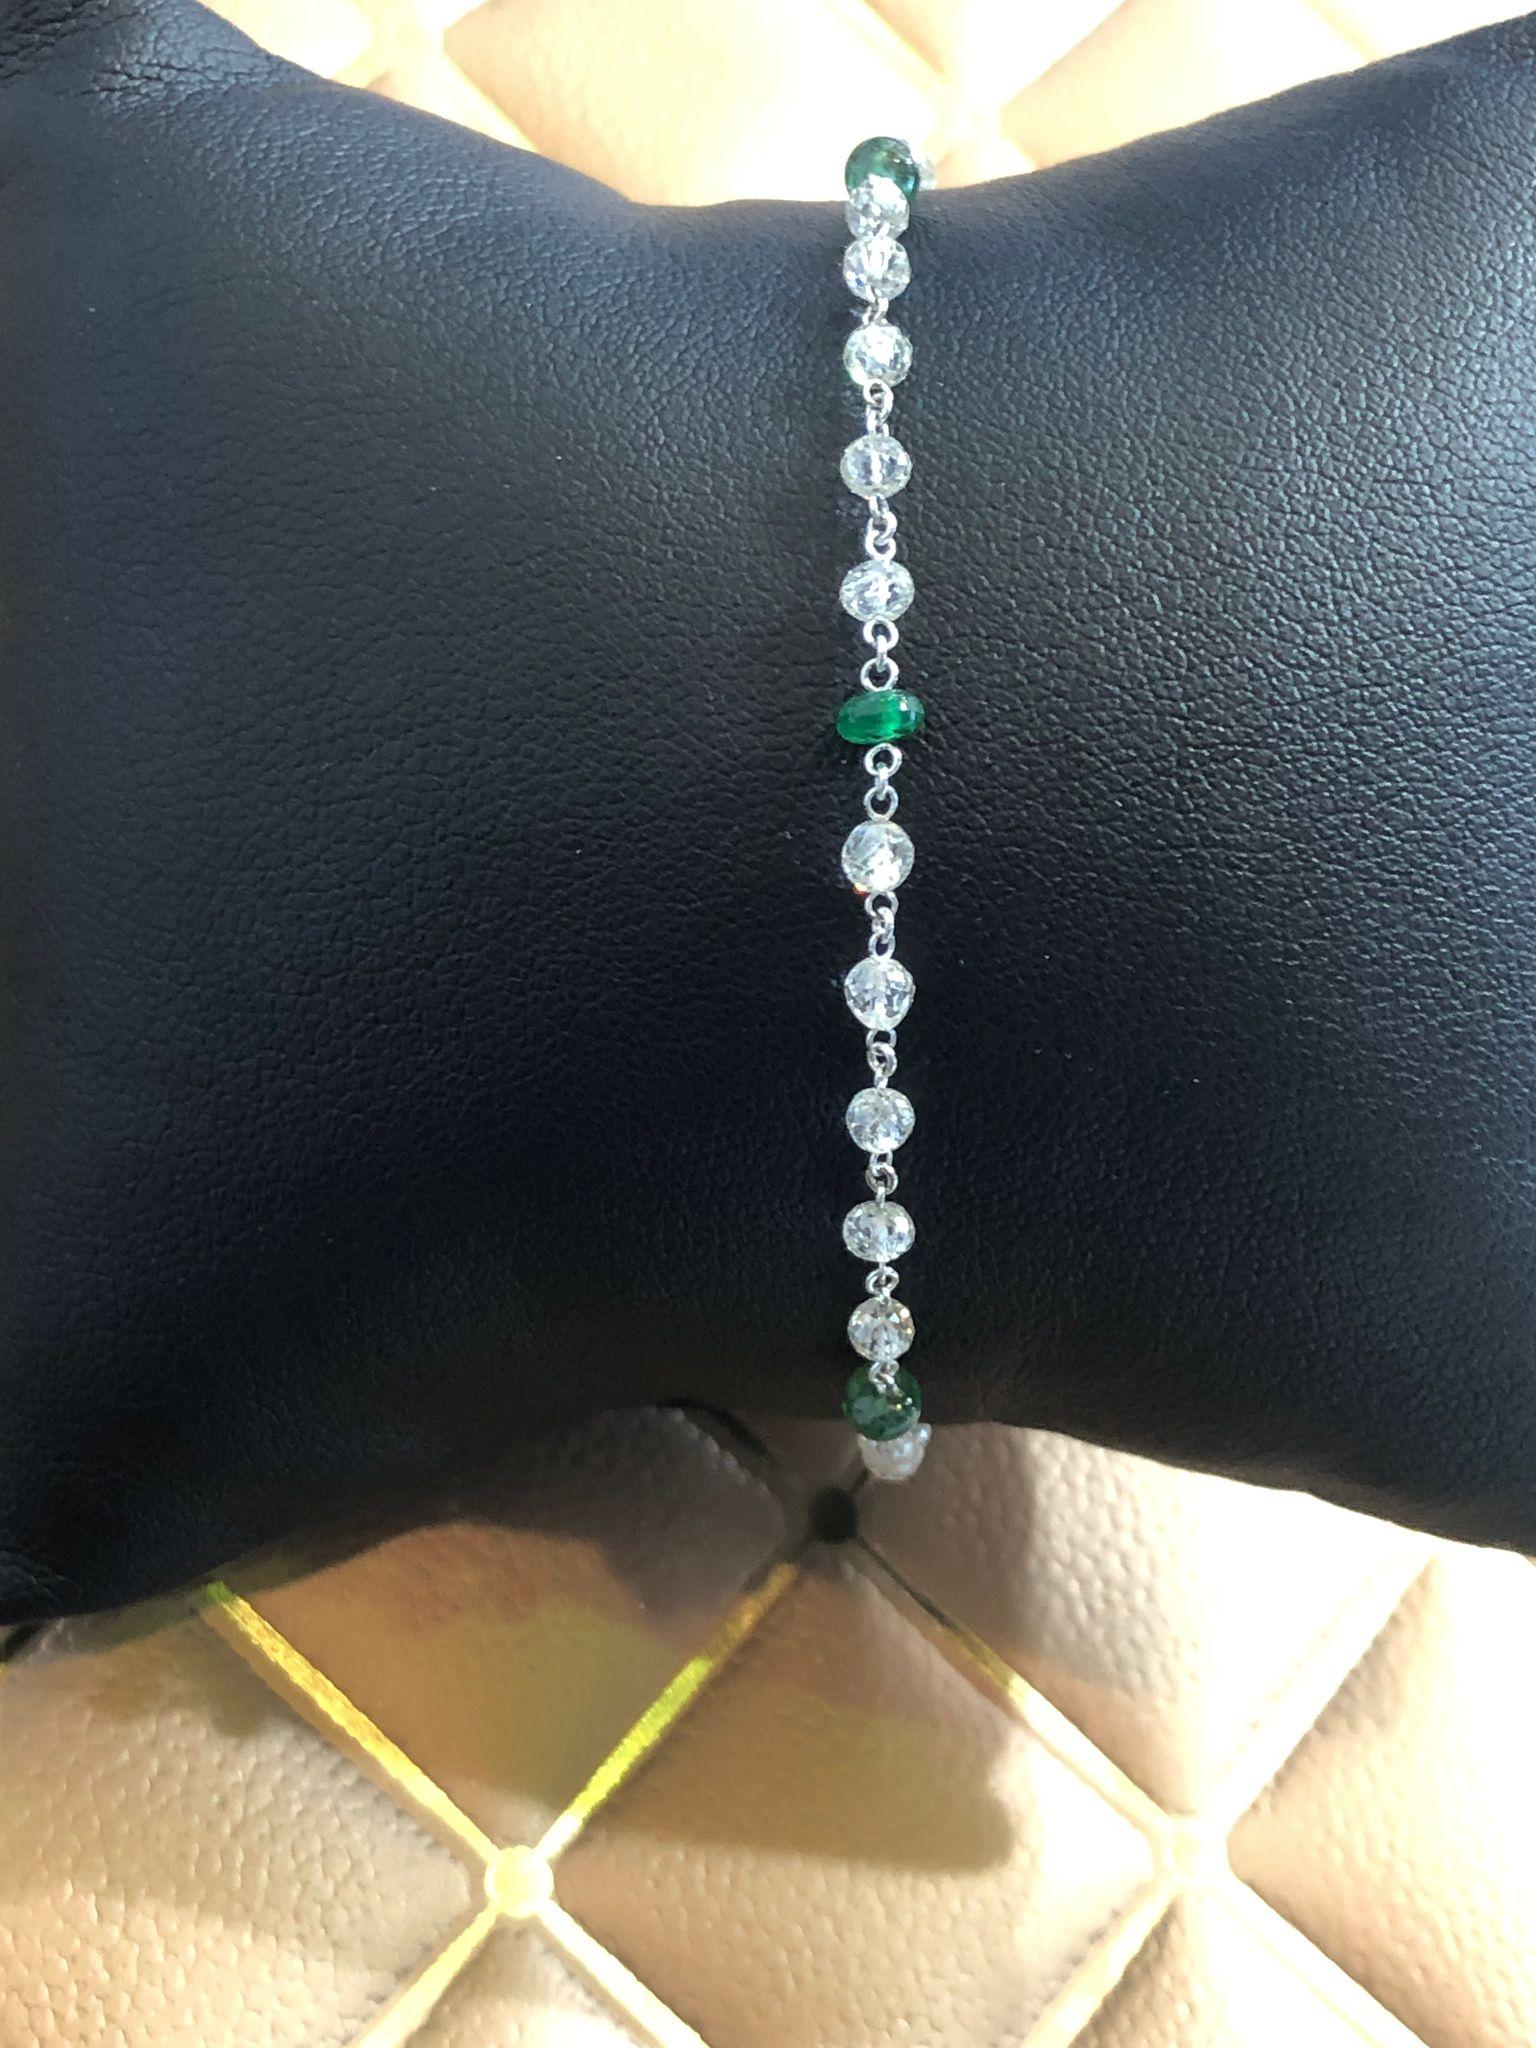 PANIM  18k White gold Diamond Beads & Emerald bracelet

5.80 carats of White Beads-cut Diamonds set in 18KT White gold weighing. It features 5 diamond beads and 1 emerald bead. This Bracelet can be worn everyday.

Available in 18K white, yellow and